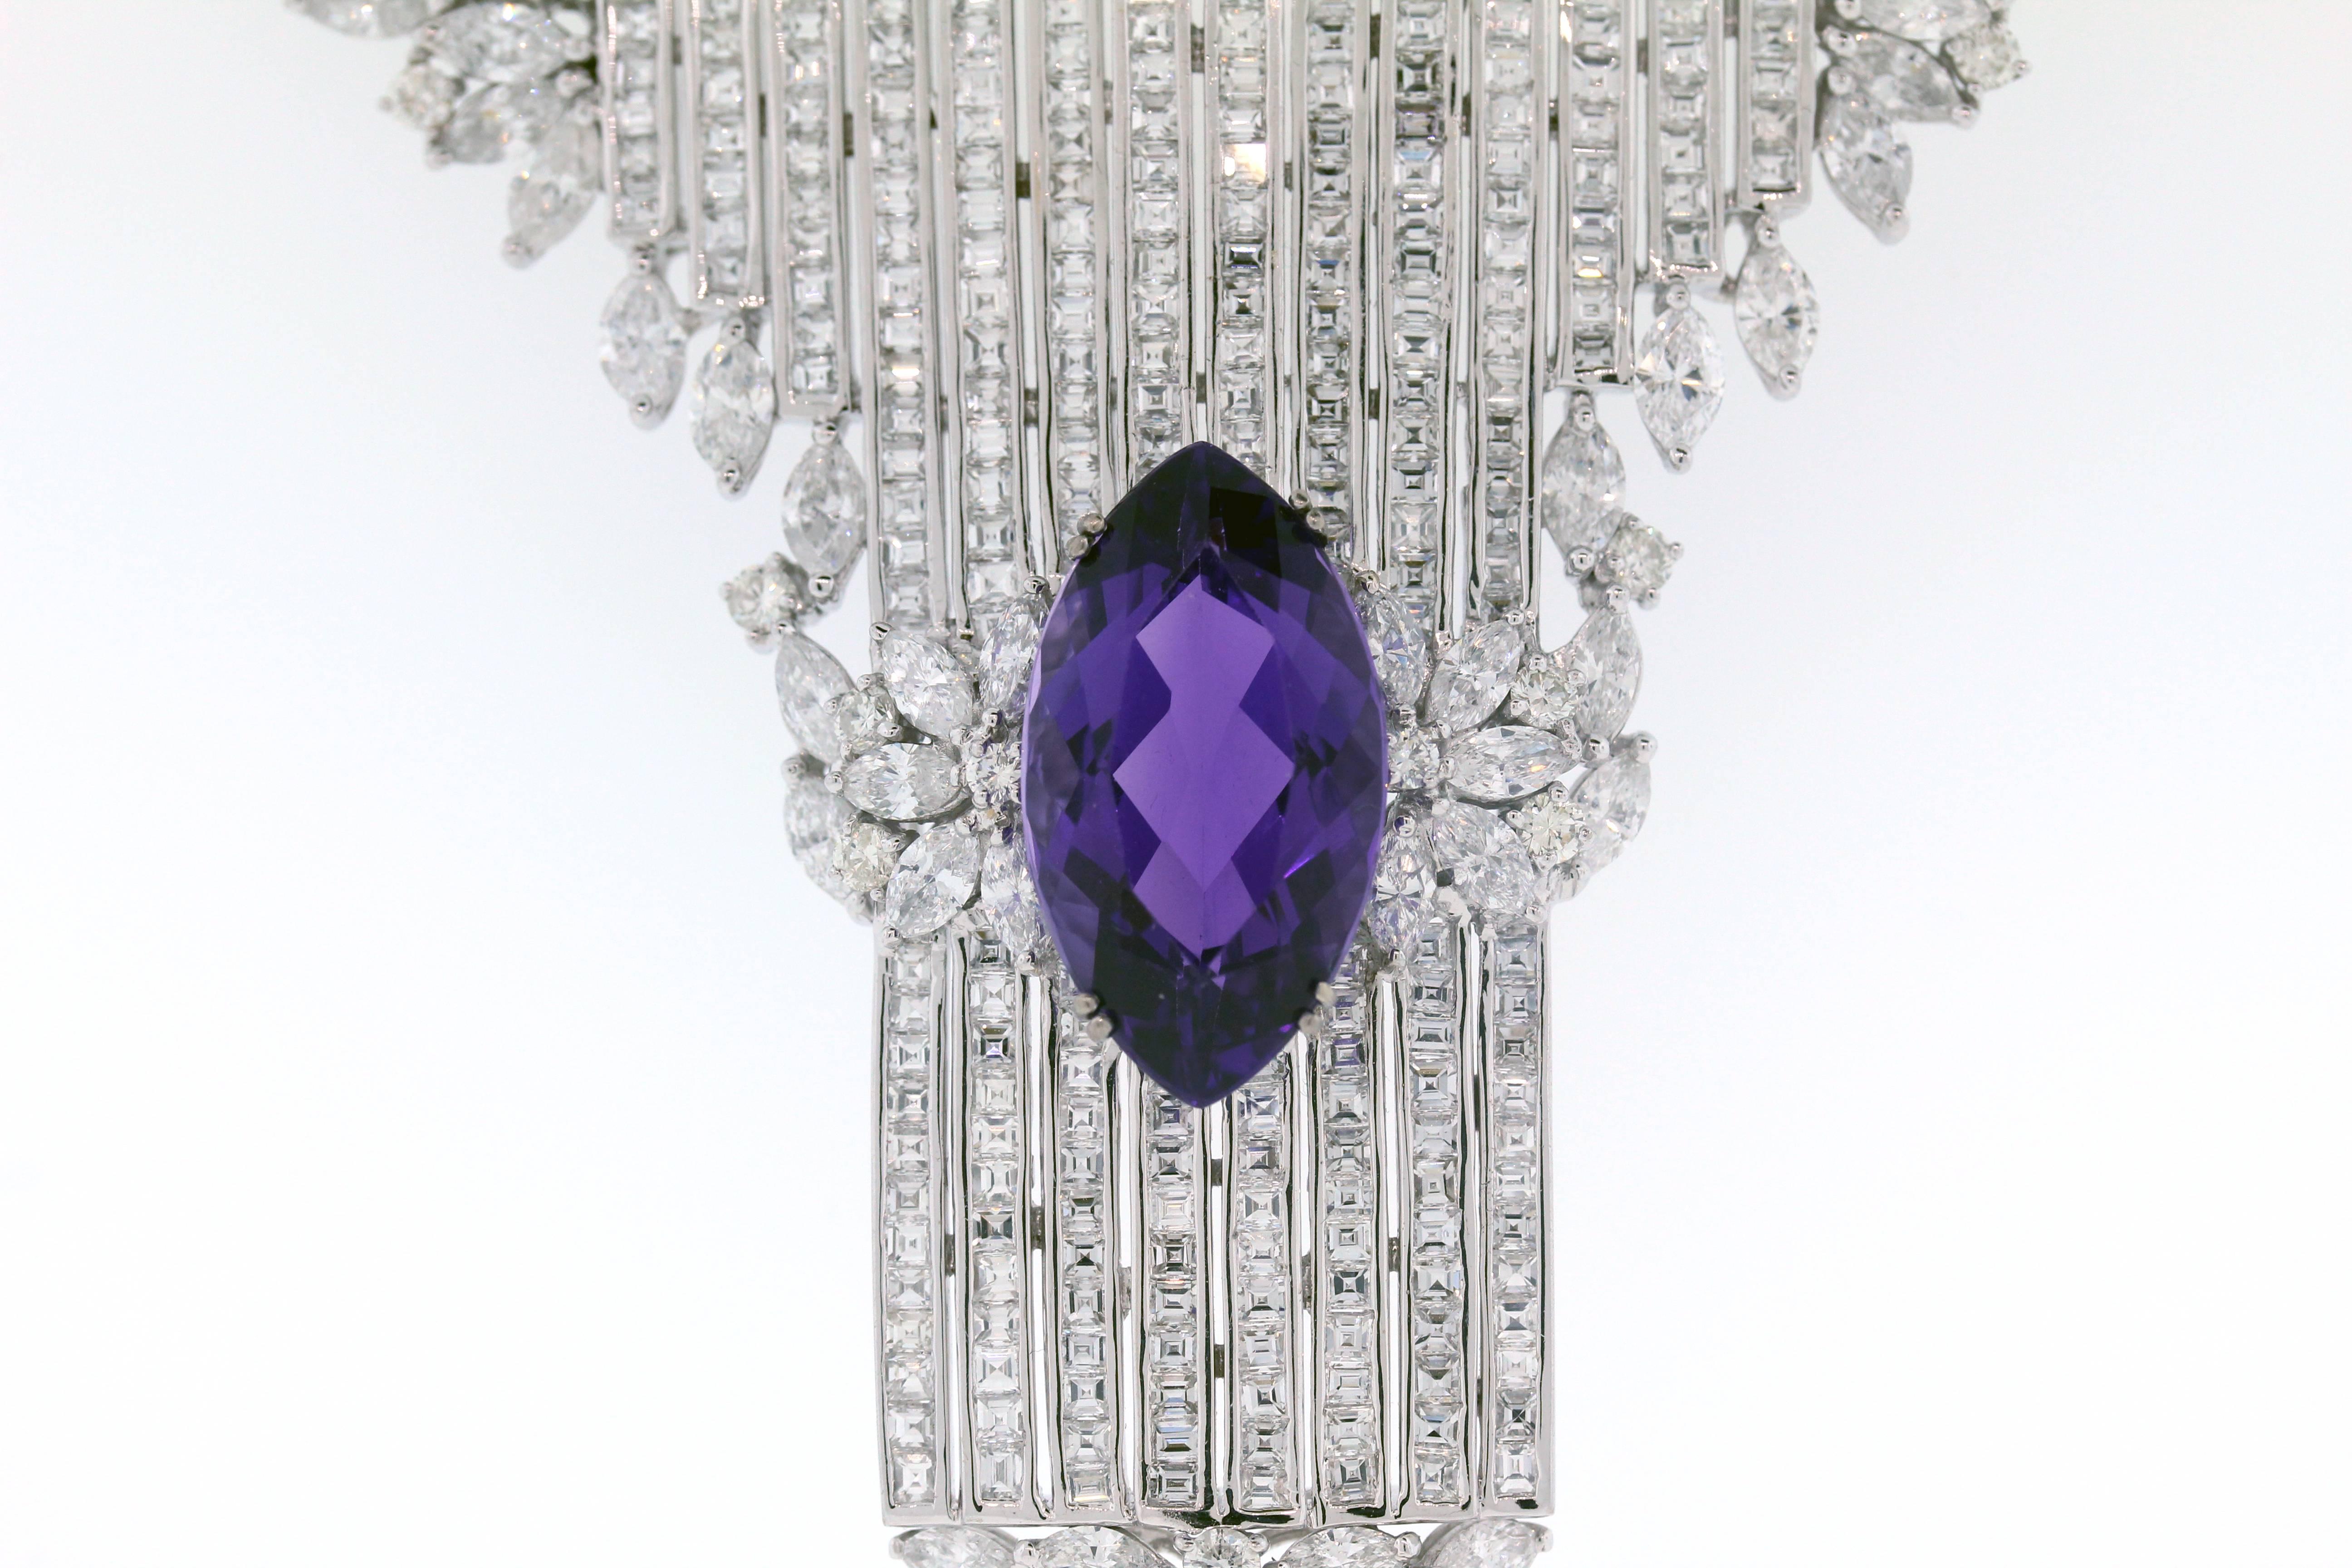 18K White Gold Necklace with Diamonds and Amethyst center

Apprx. 55.00ct. Marquis, Princess and Round cut Diamonds throughout necklace

Truly unbelievable and a one-of-a-kind

Necklace is for 16 inch neck. Pendant drop is 3 inches in length.

Width